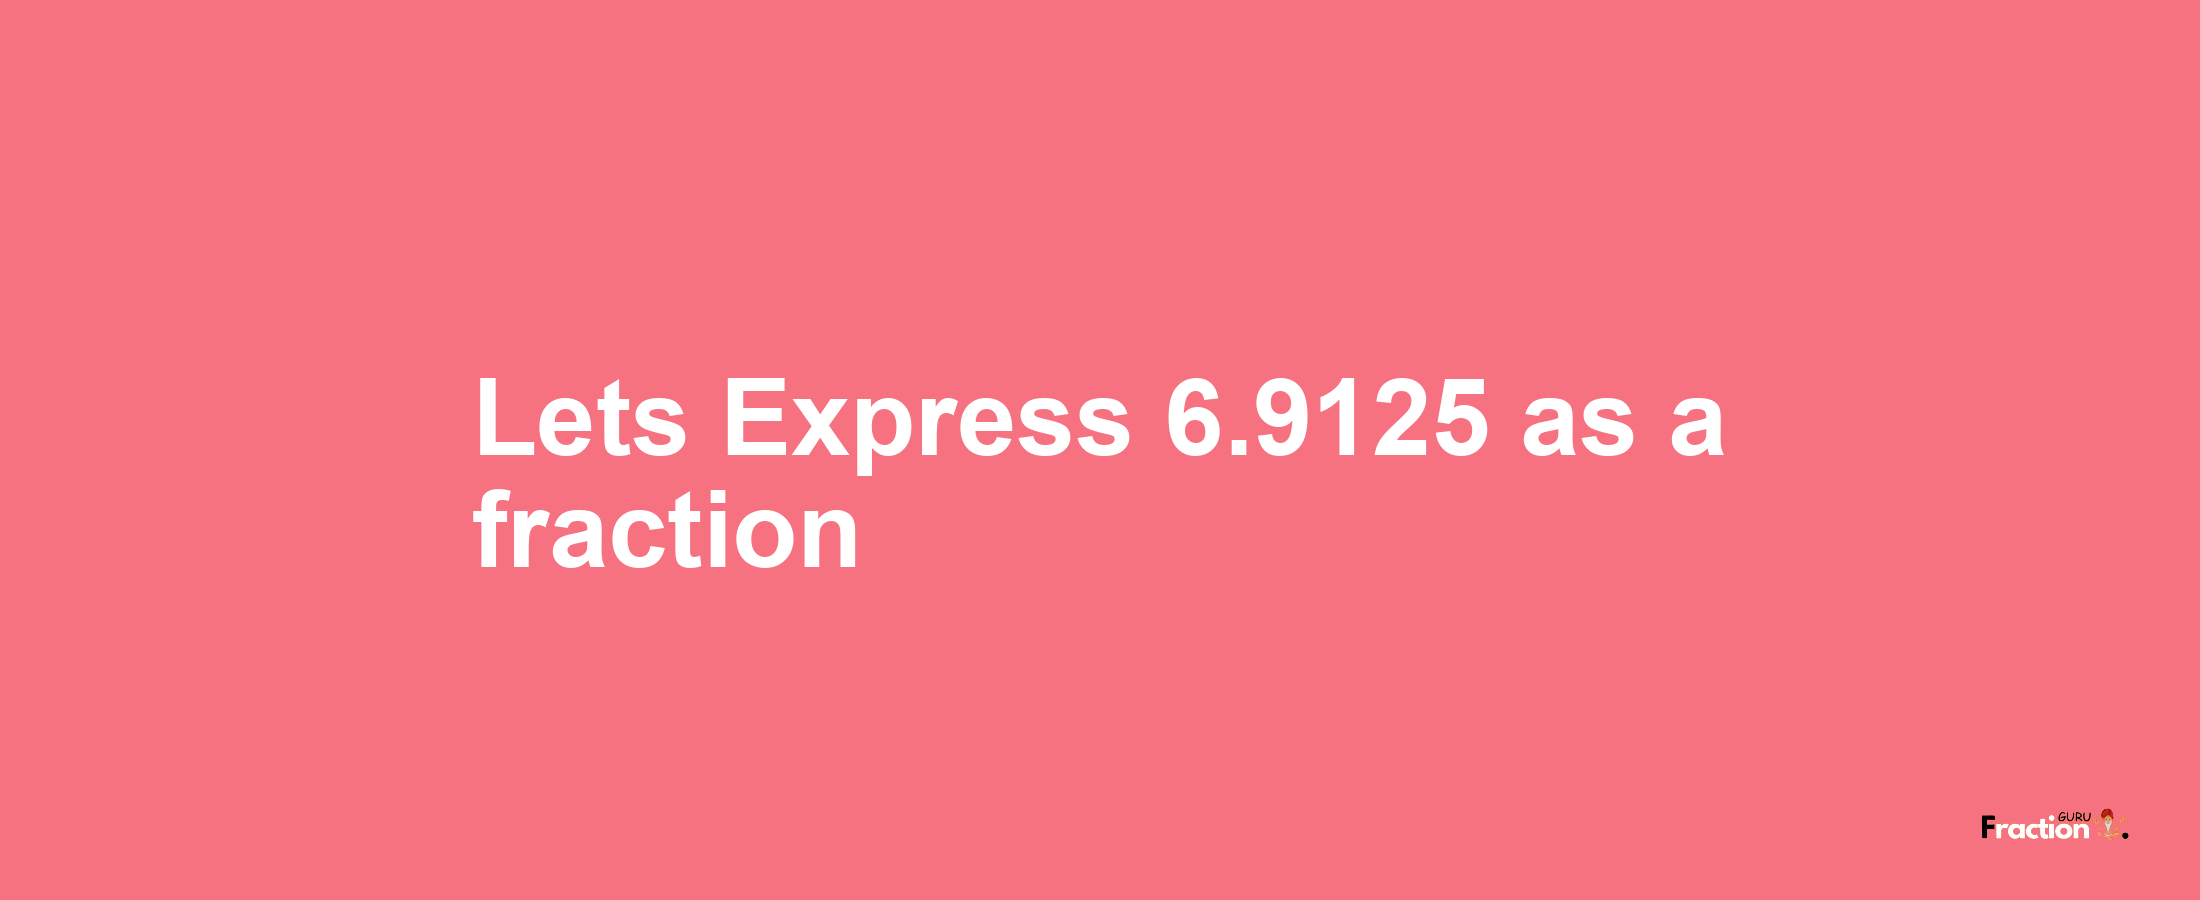 Lets Express 6.9125 as afraction